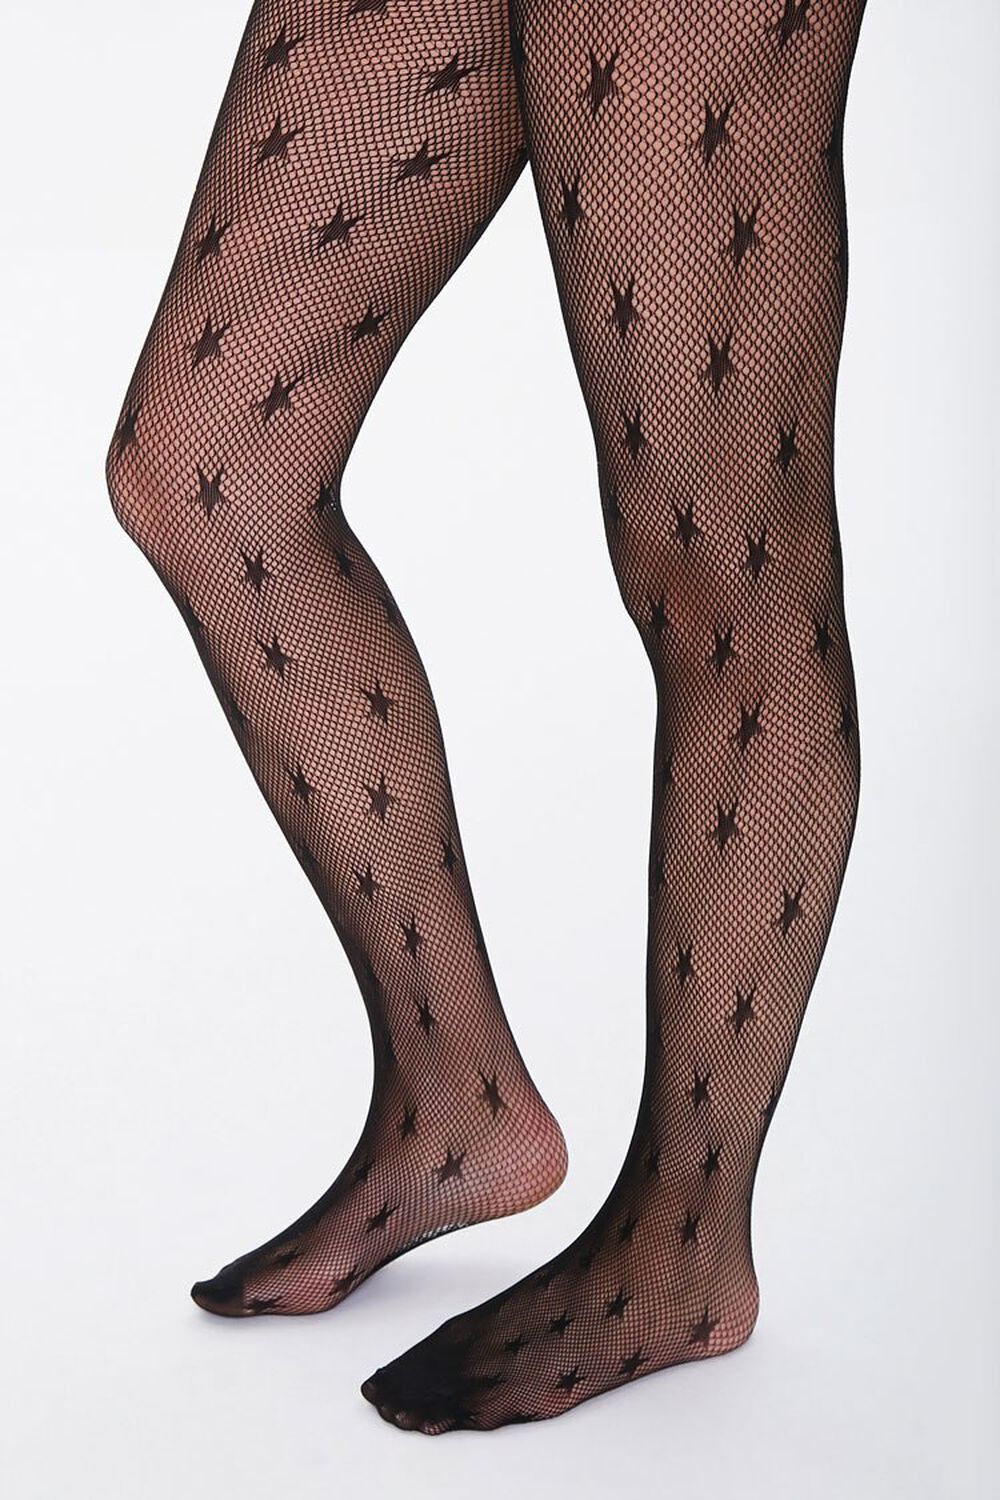 BLACK Netted Star Tights, image 1